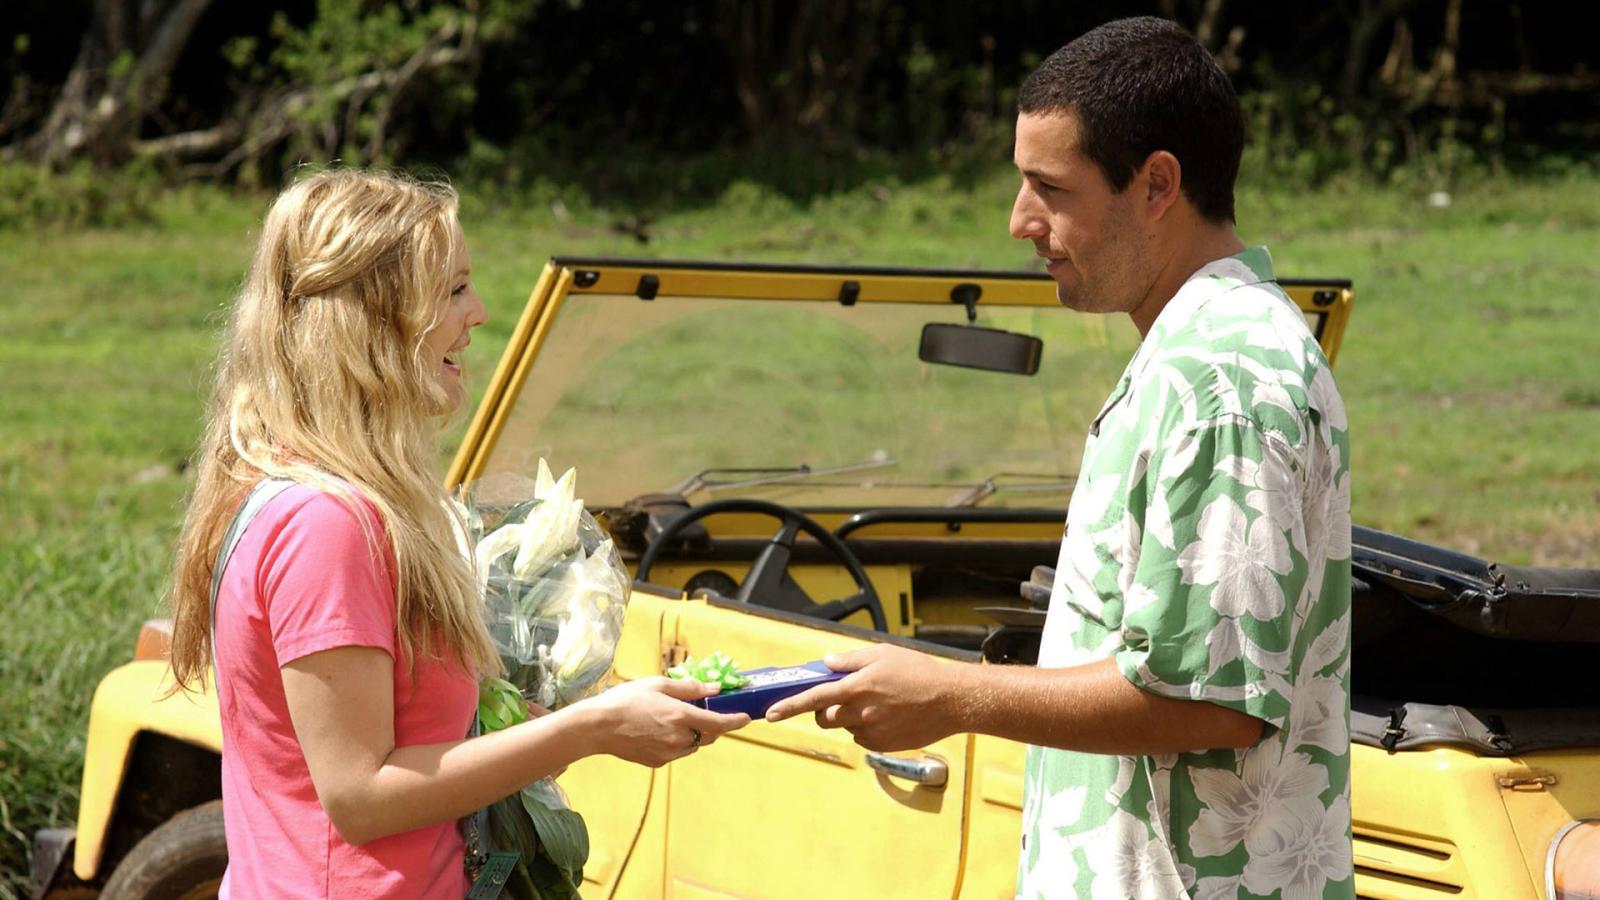 15 Best Movies With Adam Sandler to Watch With Family - image 3